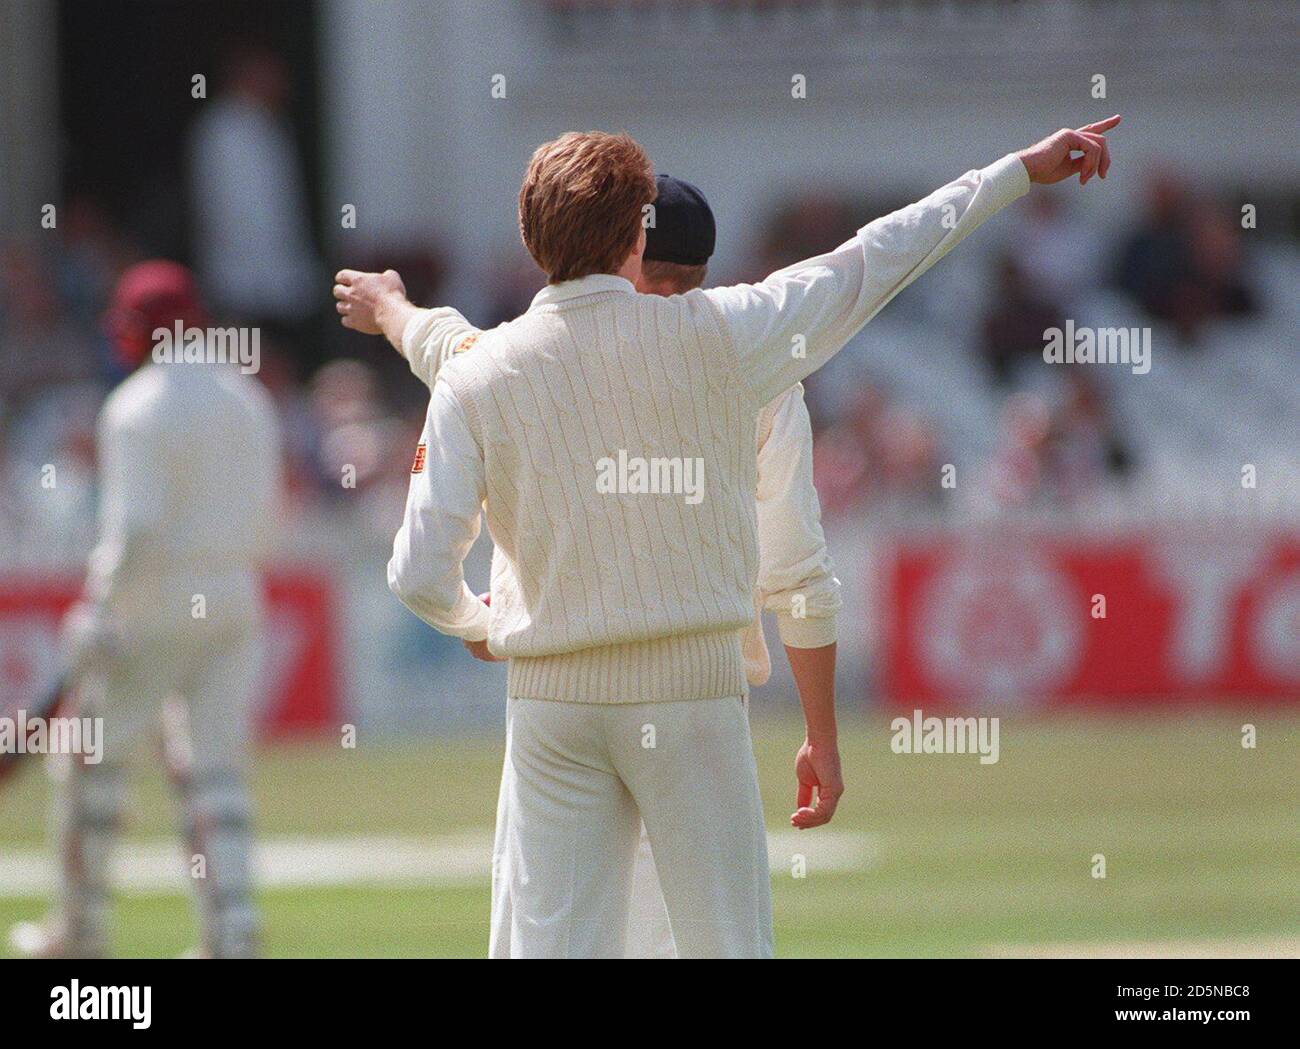 There seems to be a difference of opinion between England's captain Michael Atherton (hidden) and teammate Shaun Udal (front) about field placings  Stock Photo